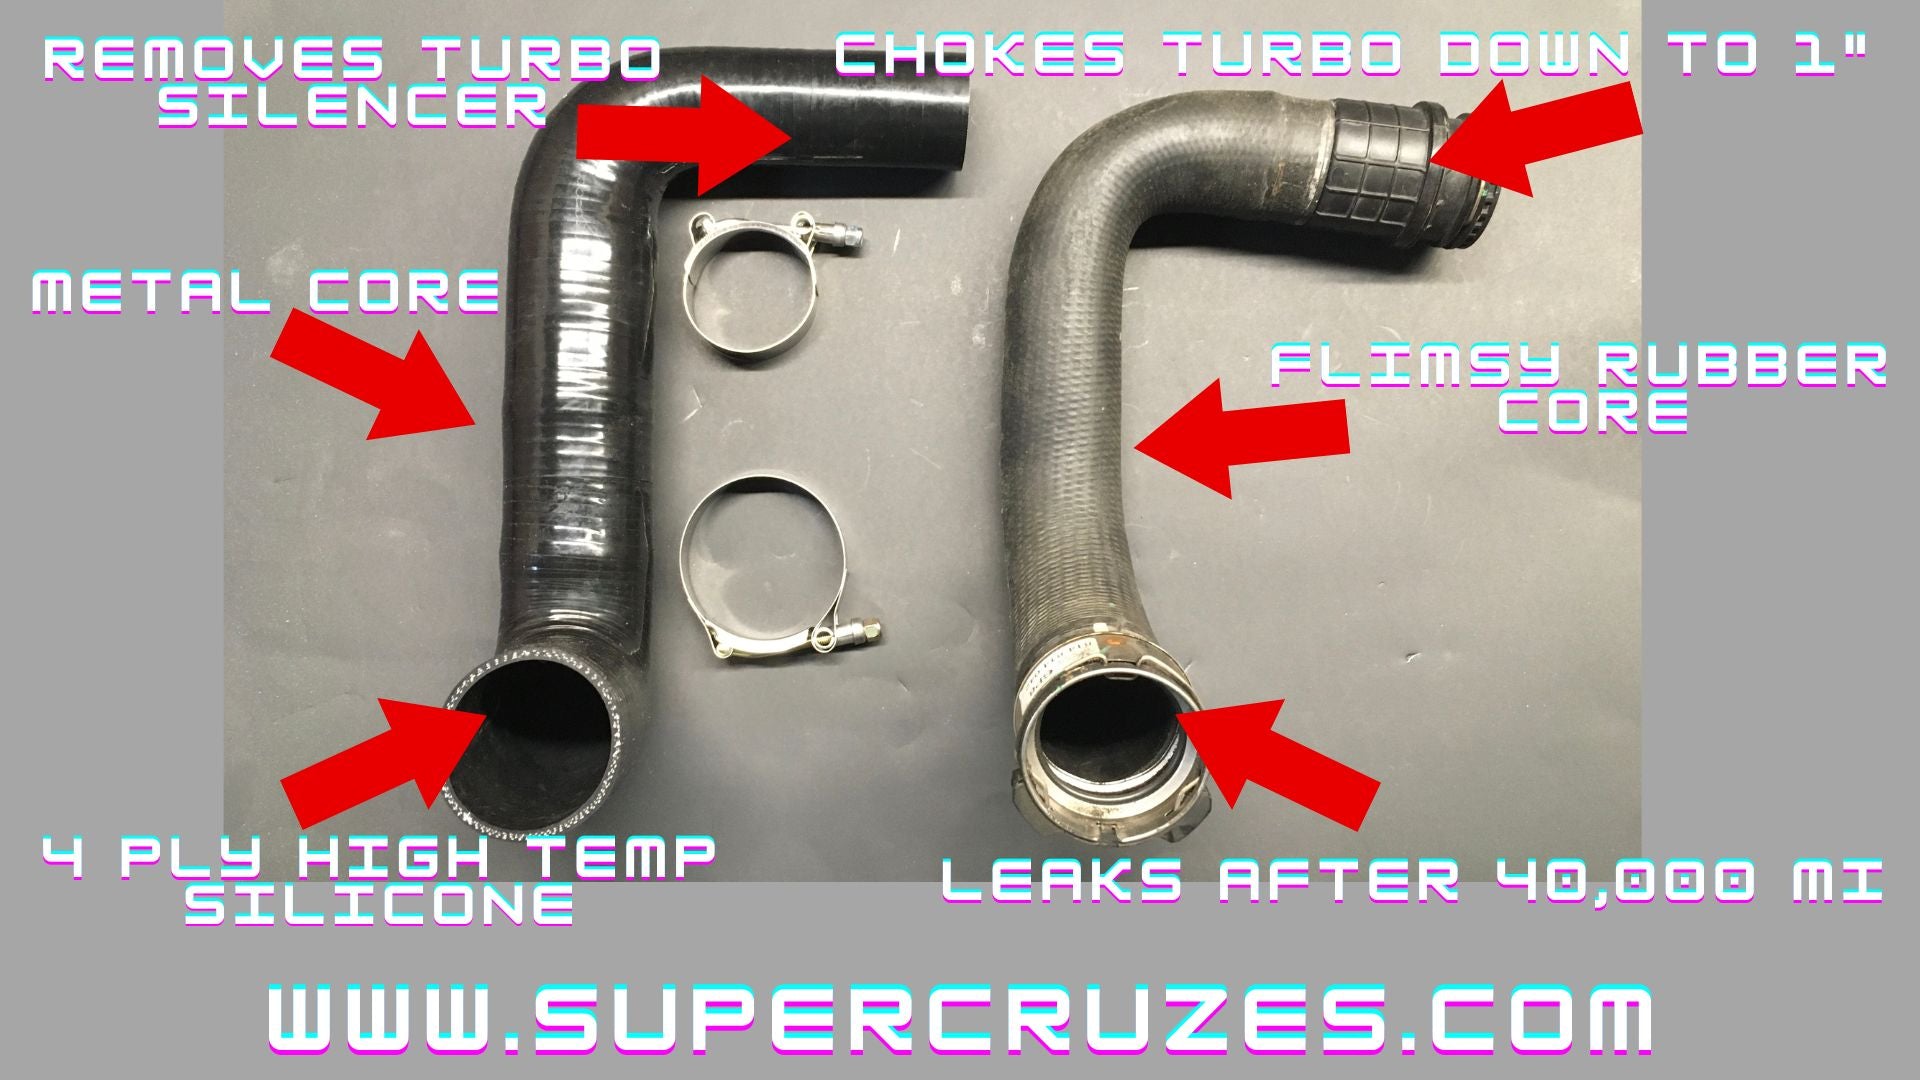 CRUZE Charge pipe upgrade removes turbo silencer